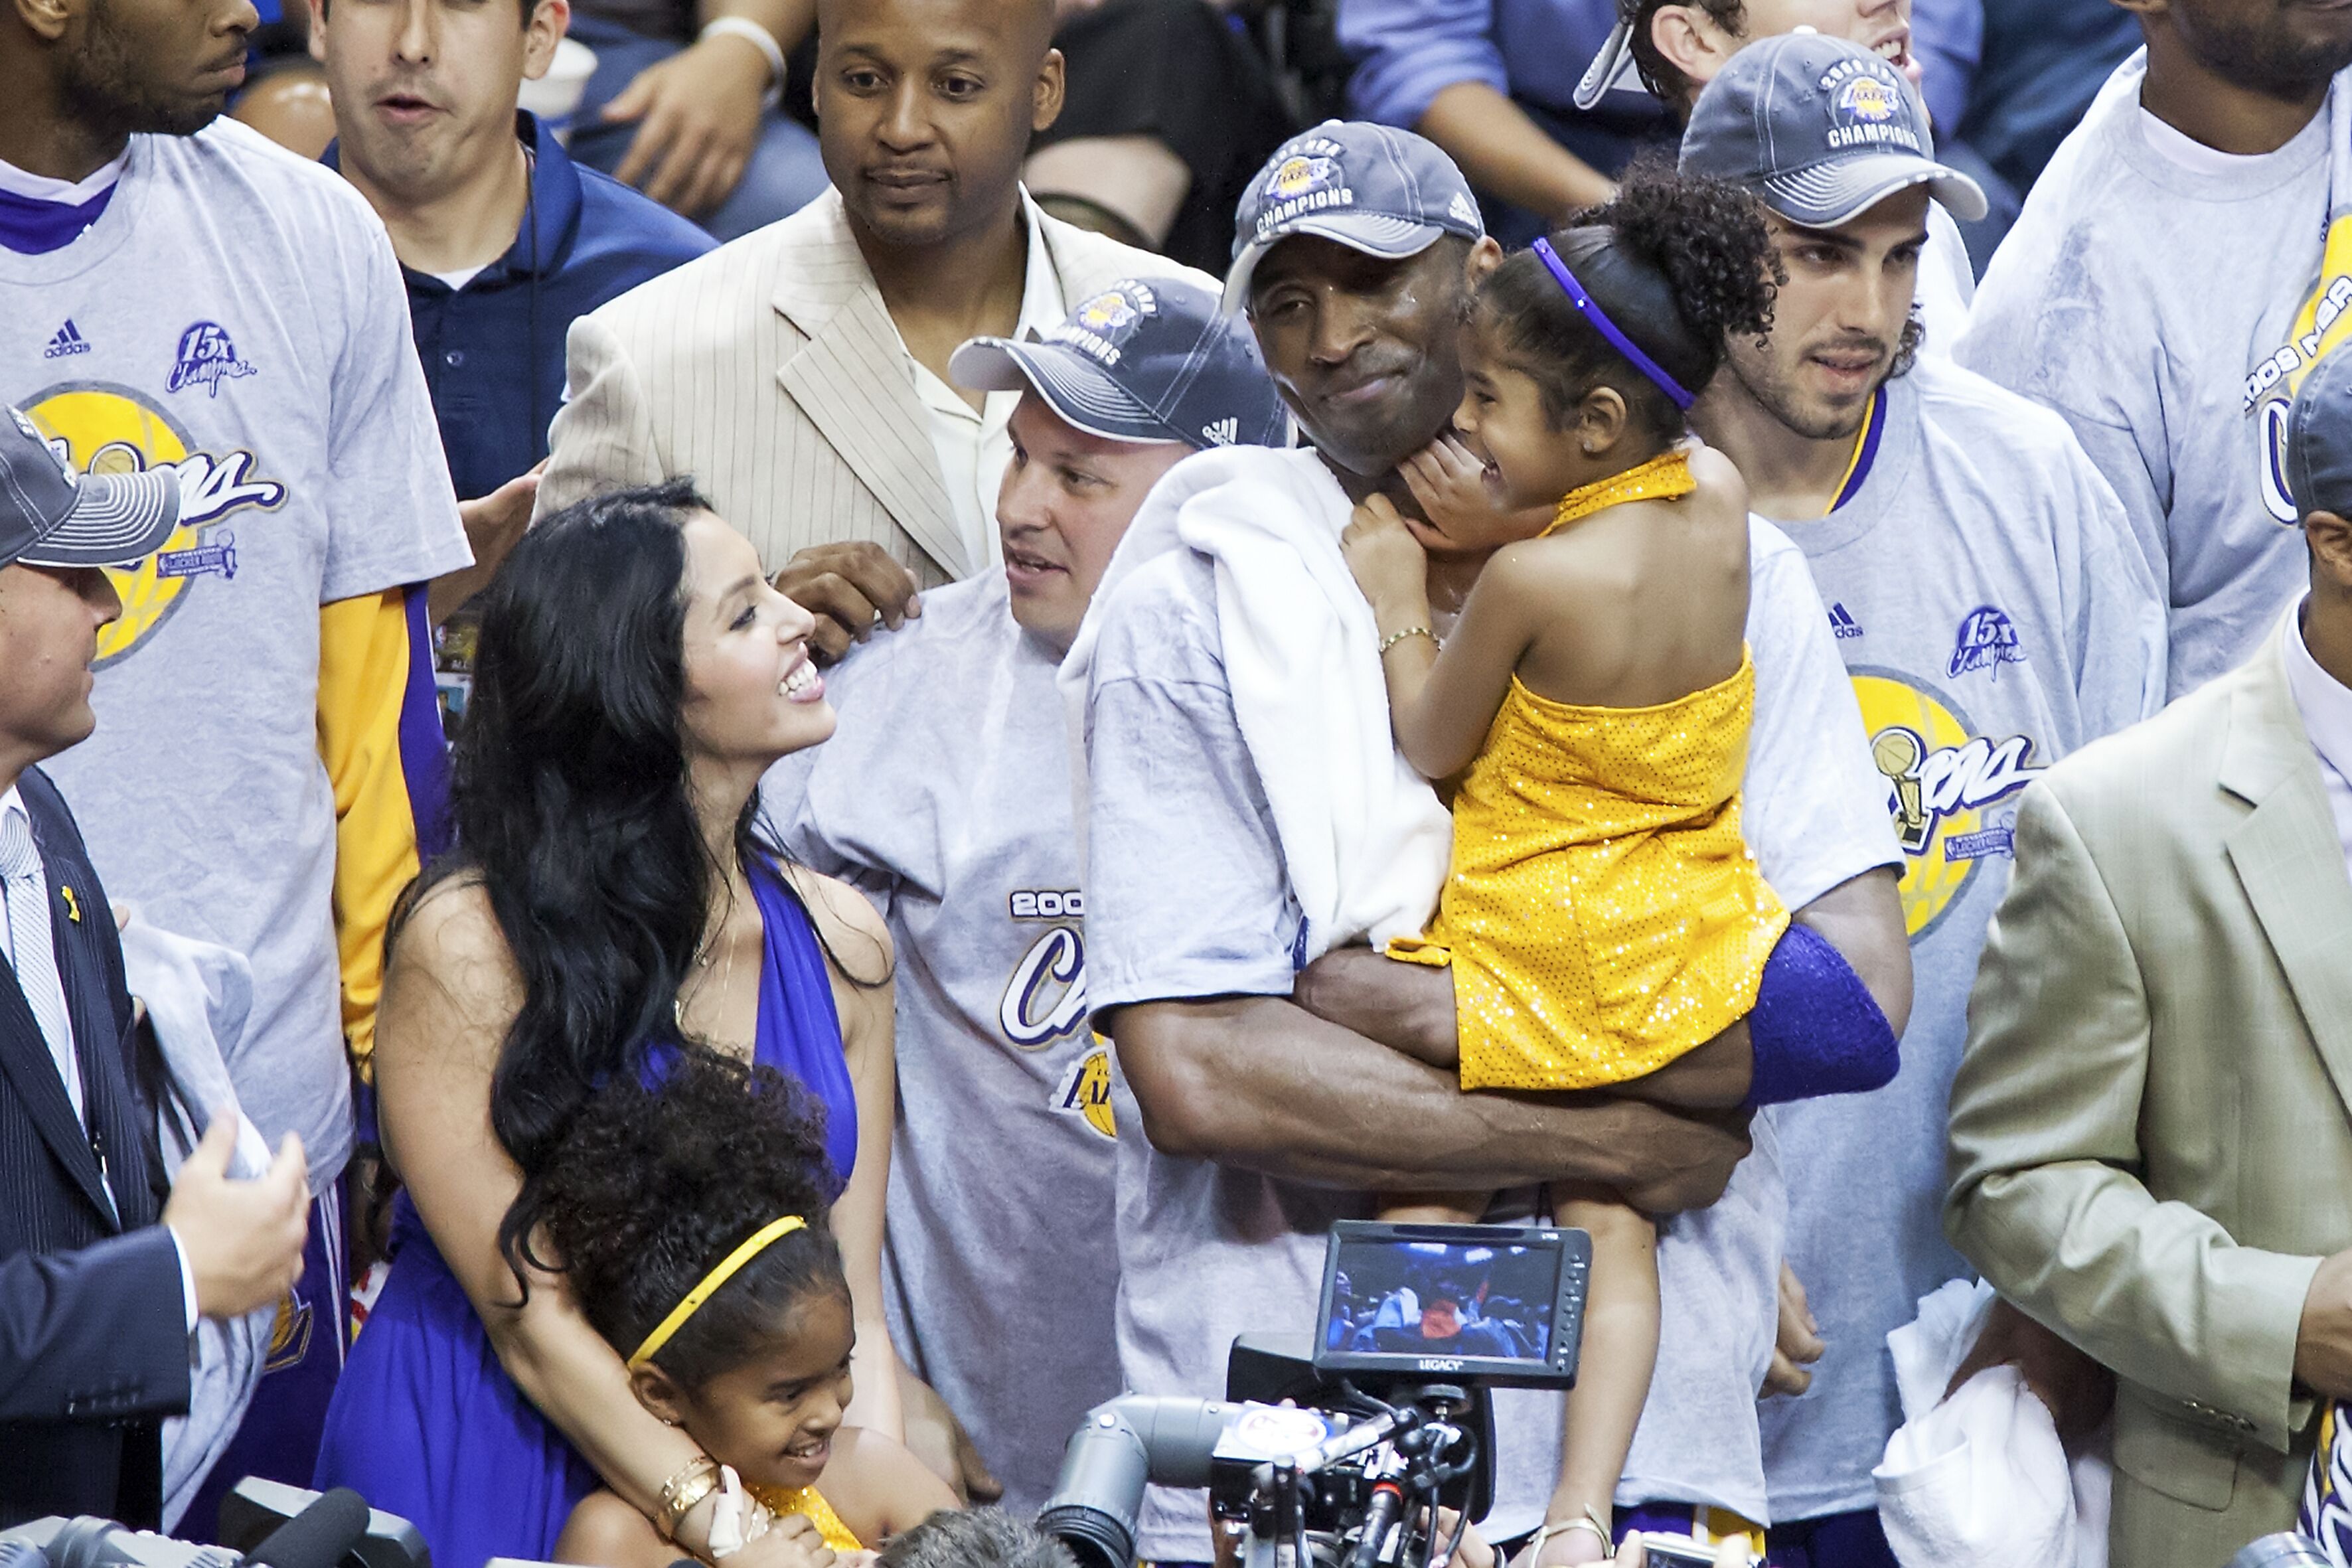 Kobe Bryant and his family at the Game Five of the 2009 NBA Finals against the Orlando Magic. | Source: Getty Images